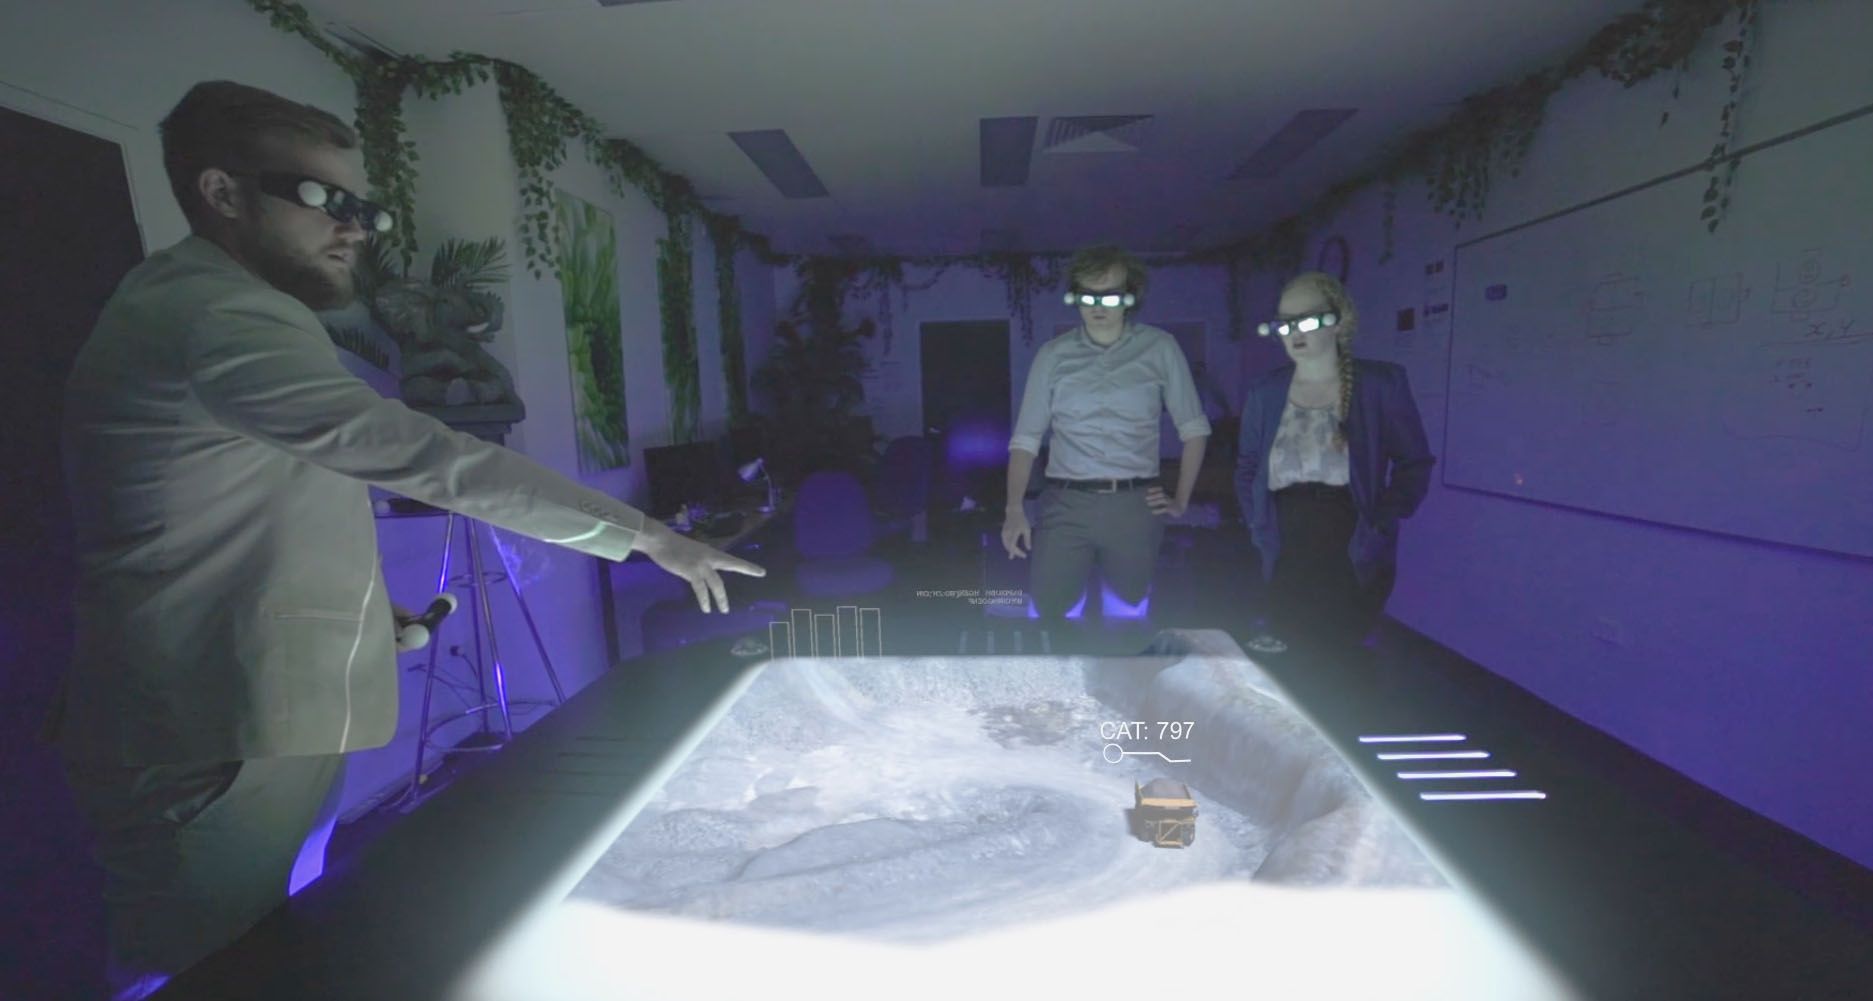 Two people with 3D glasses and wands stand around a holgram table projecting a 3D image of a city